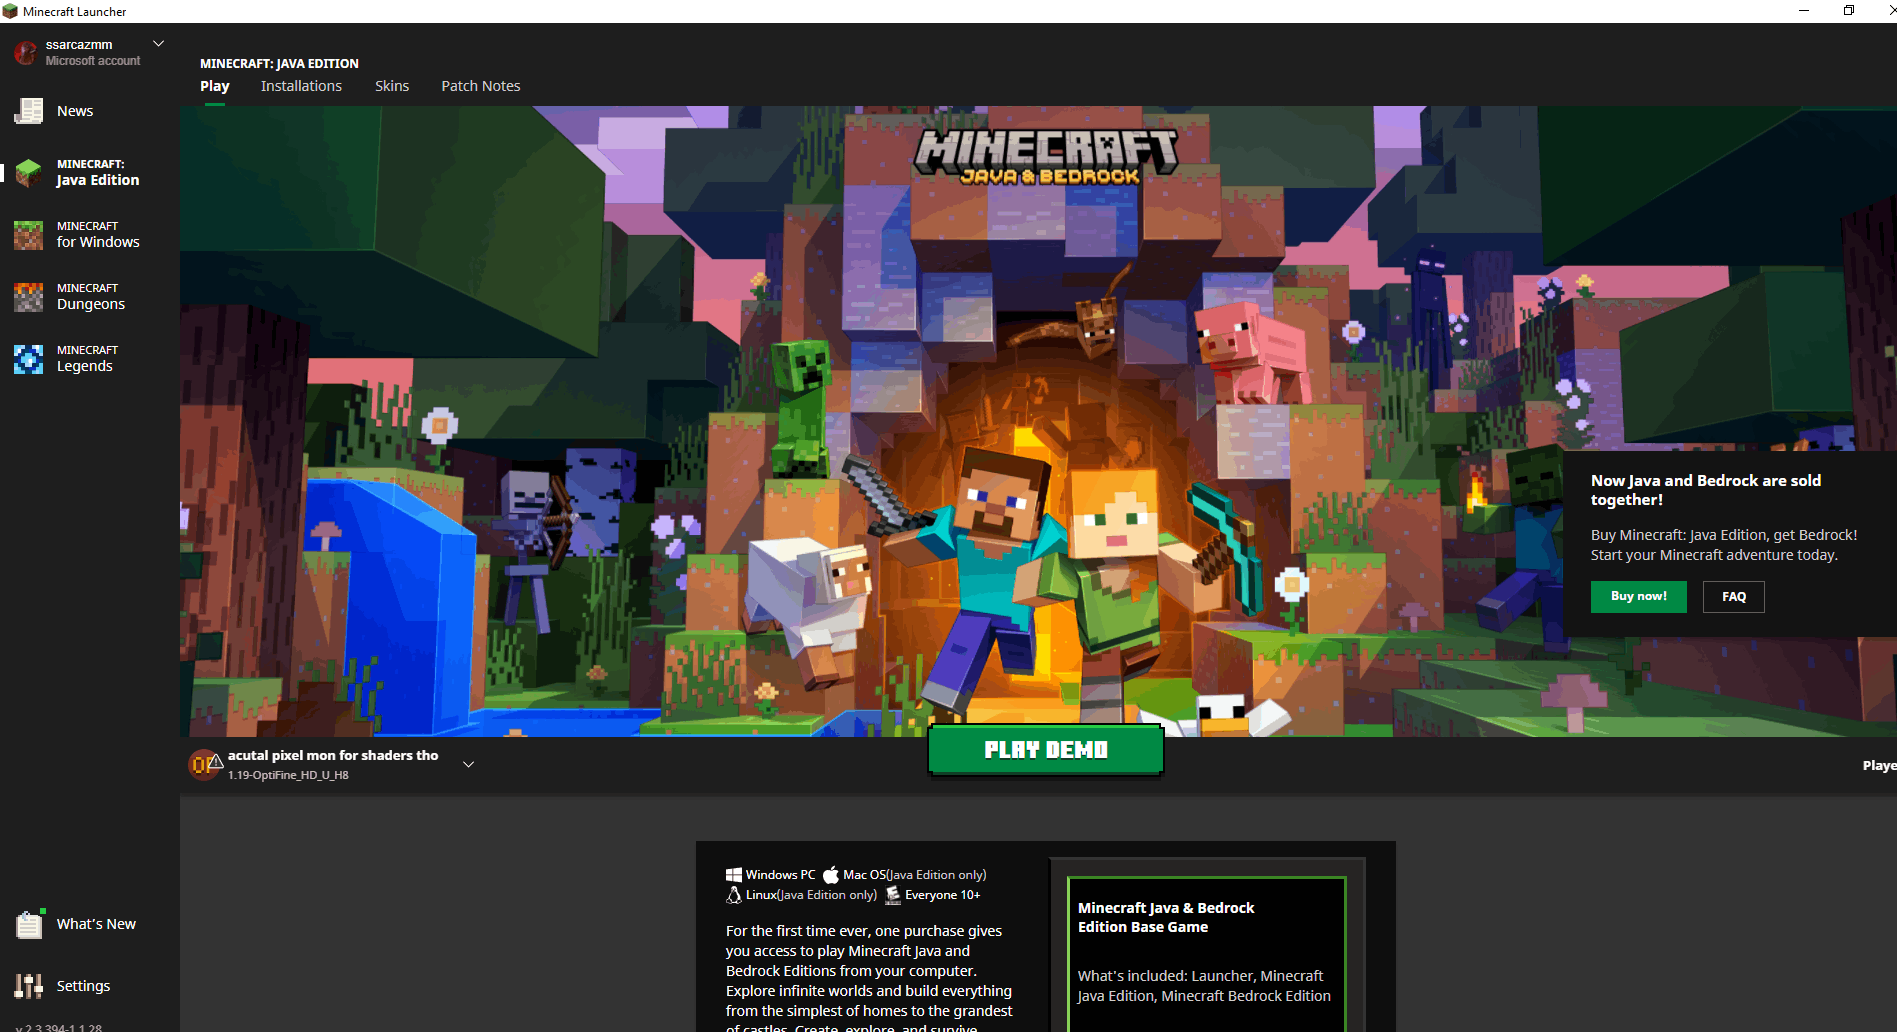 How to connect Mojang account to Microsoft account